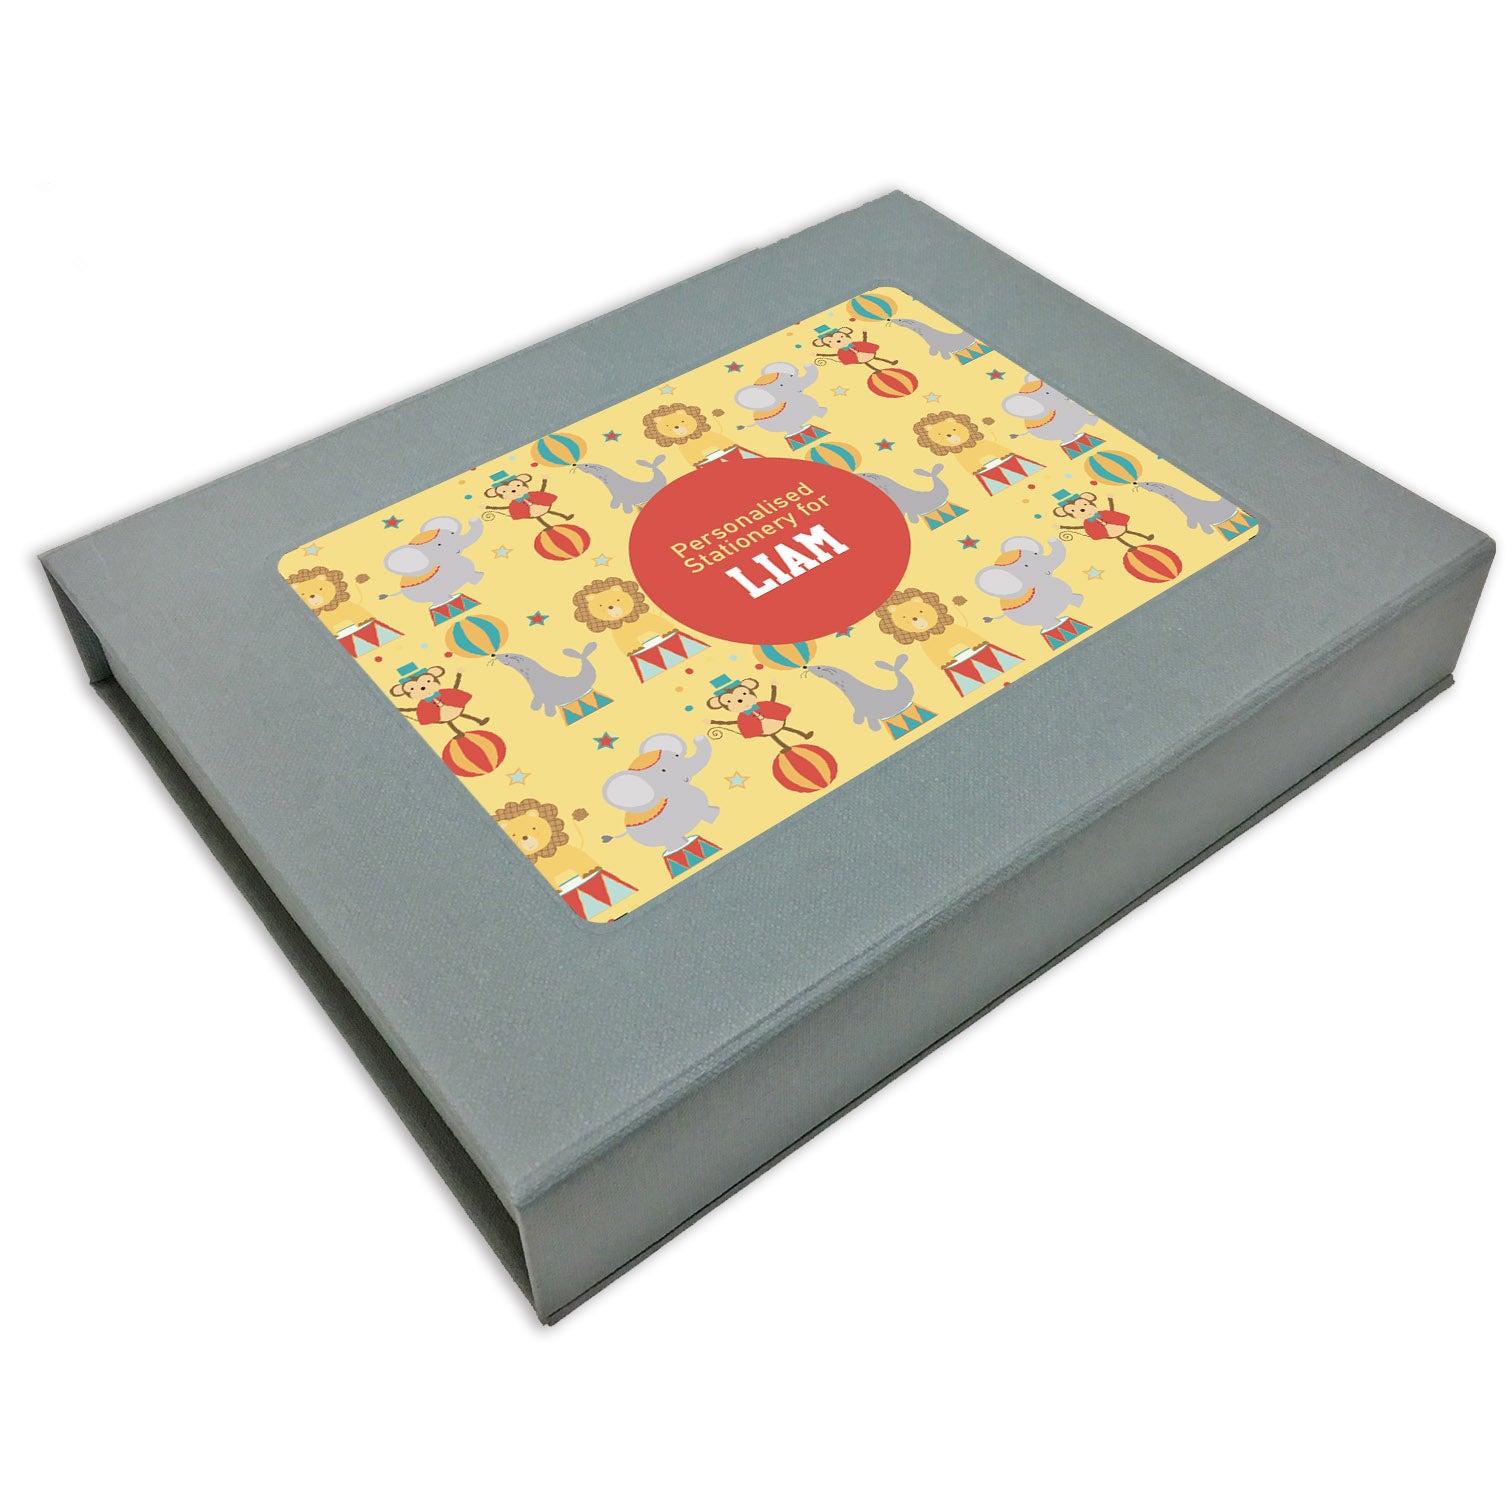 Personalized Stationery Gift Set - Circus Circus, Set of 24 or 48